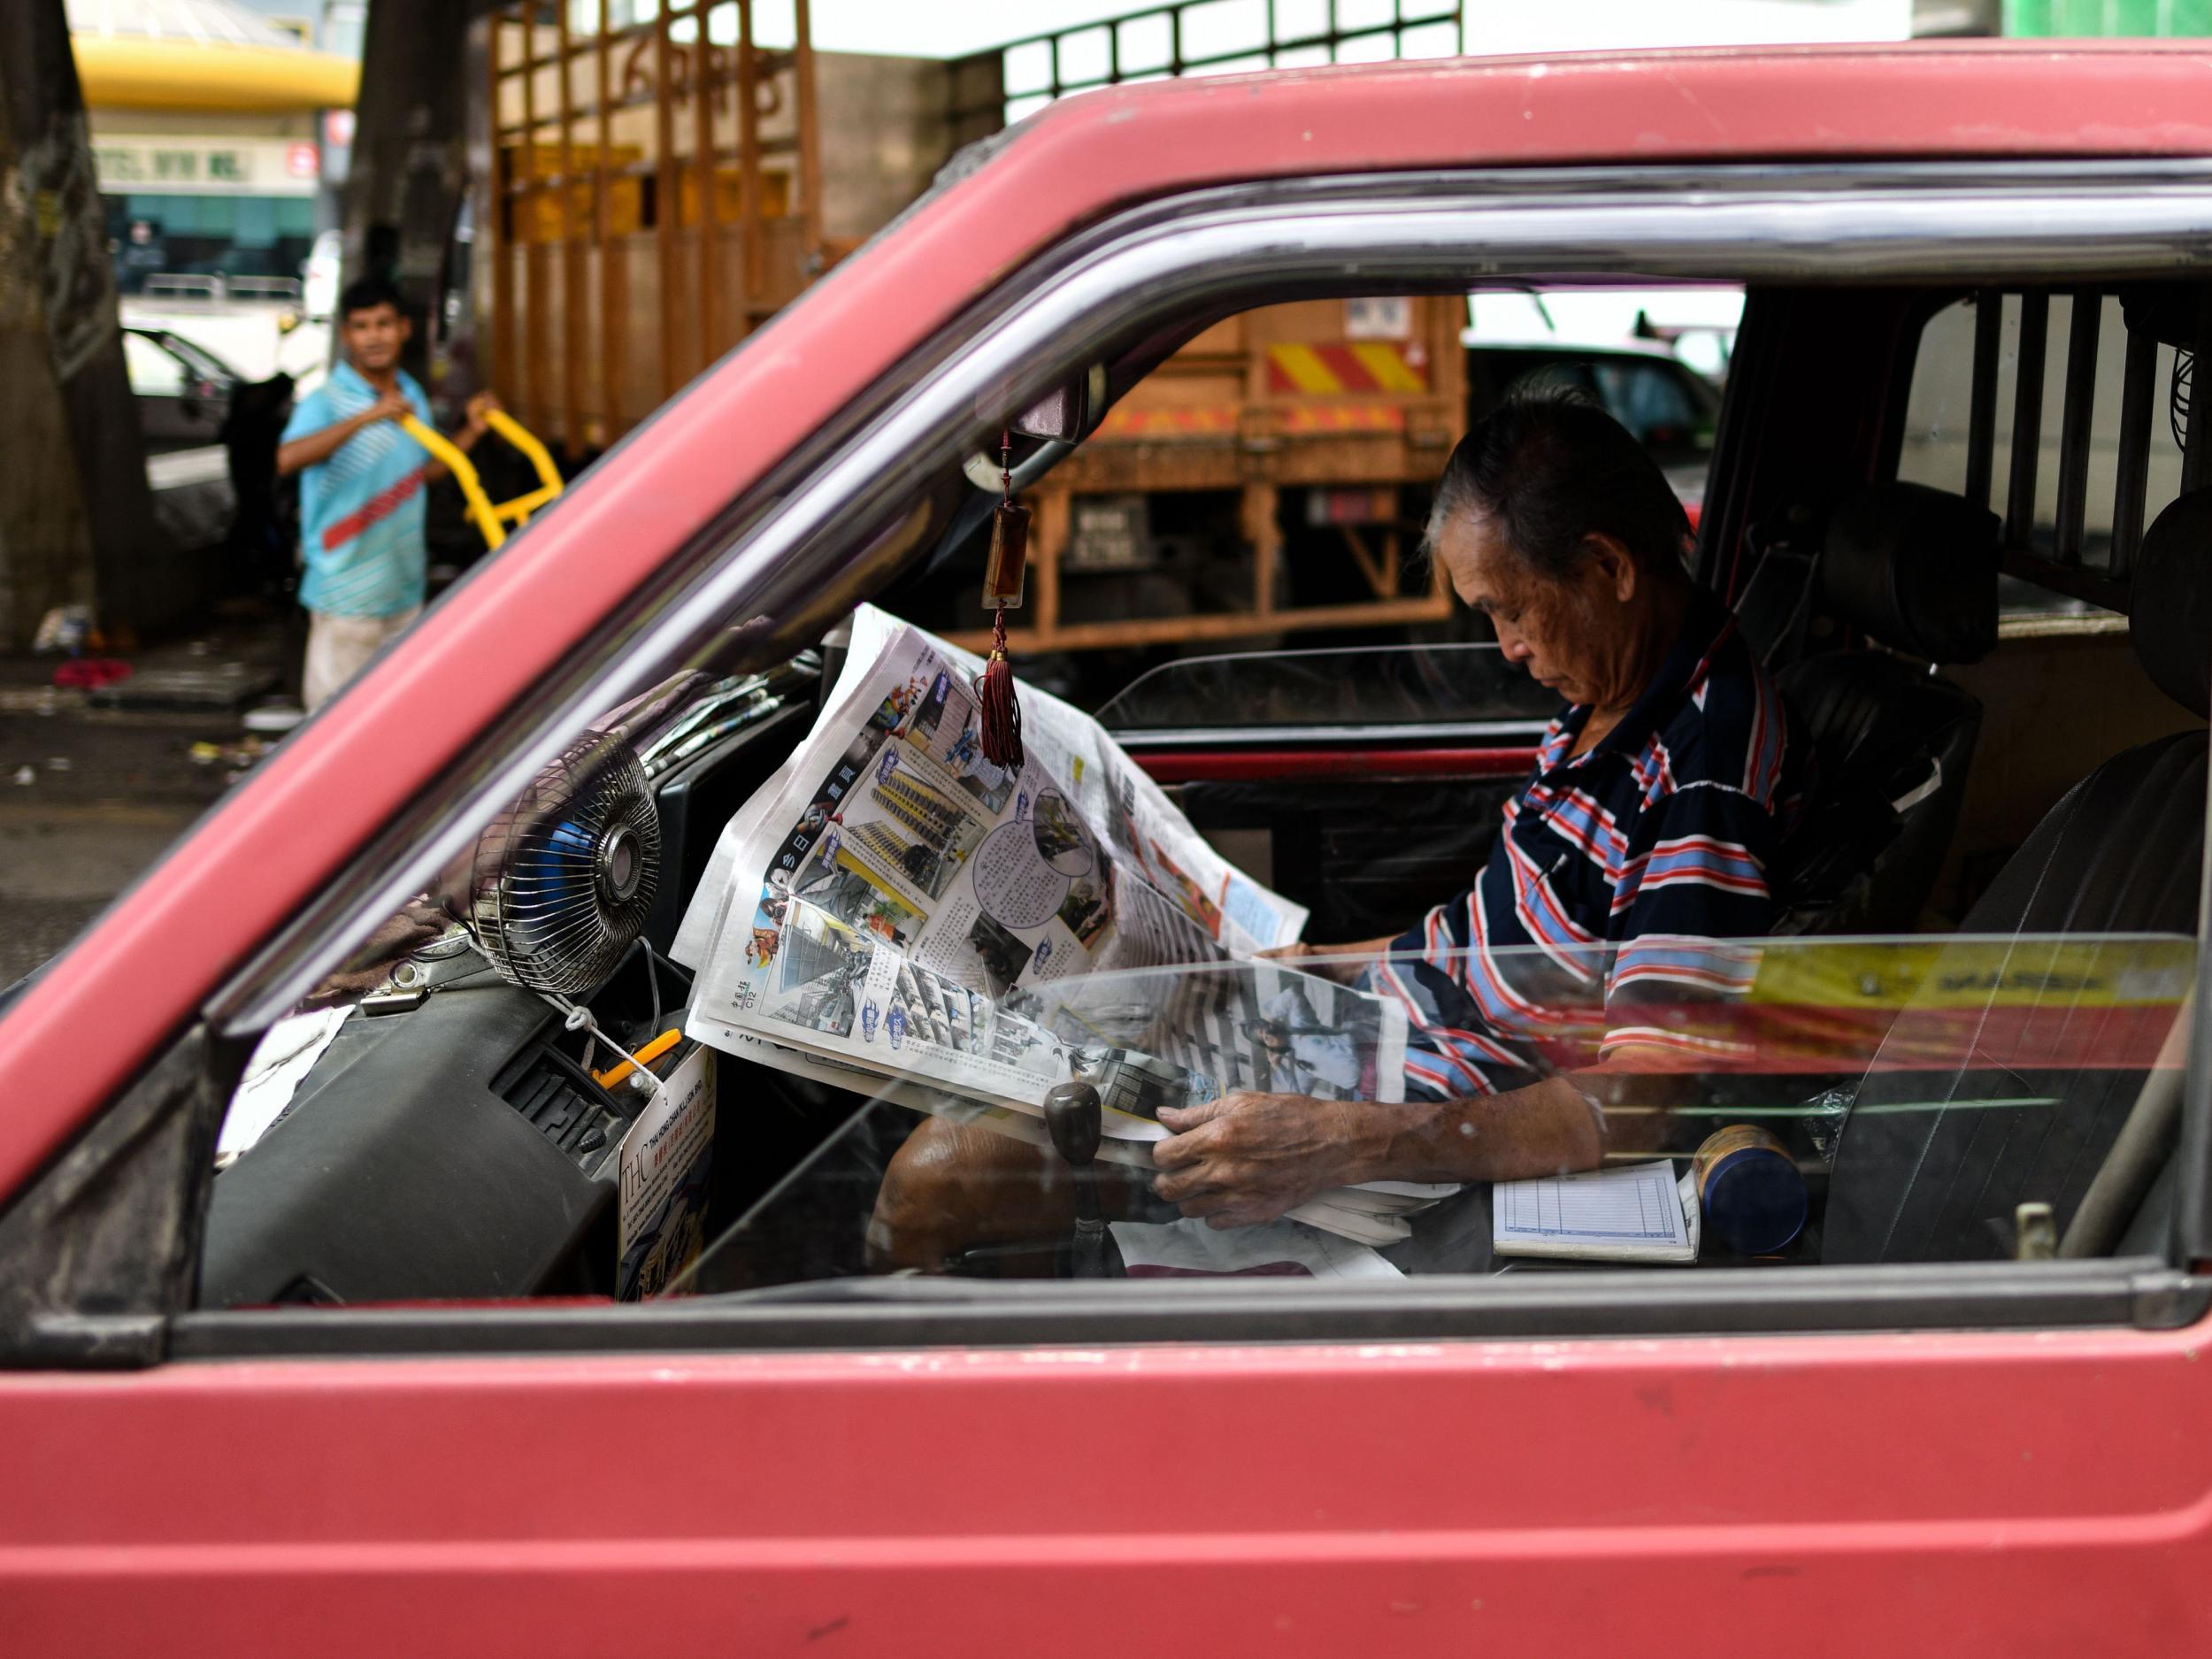 A Malaysian man with a newspaper on his lap inside his minivan at a wet market in downtown Kuala Lumpur on January 18, 2018